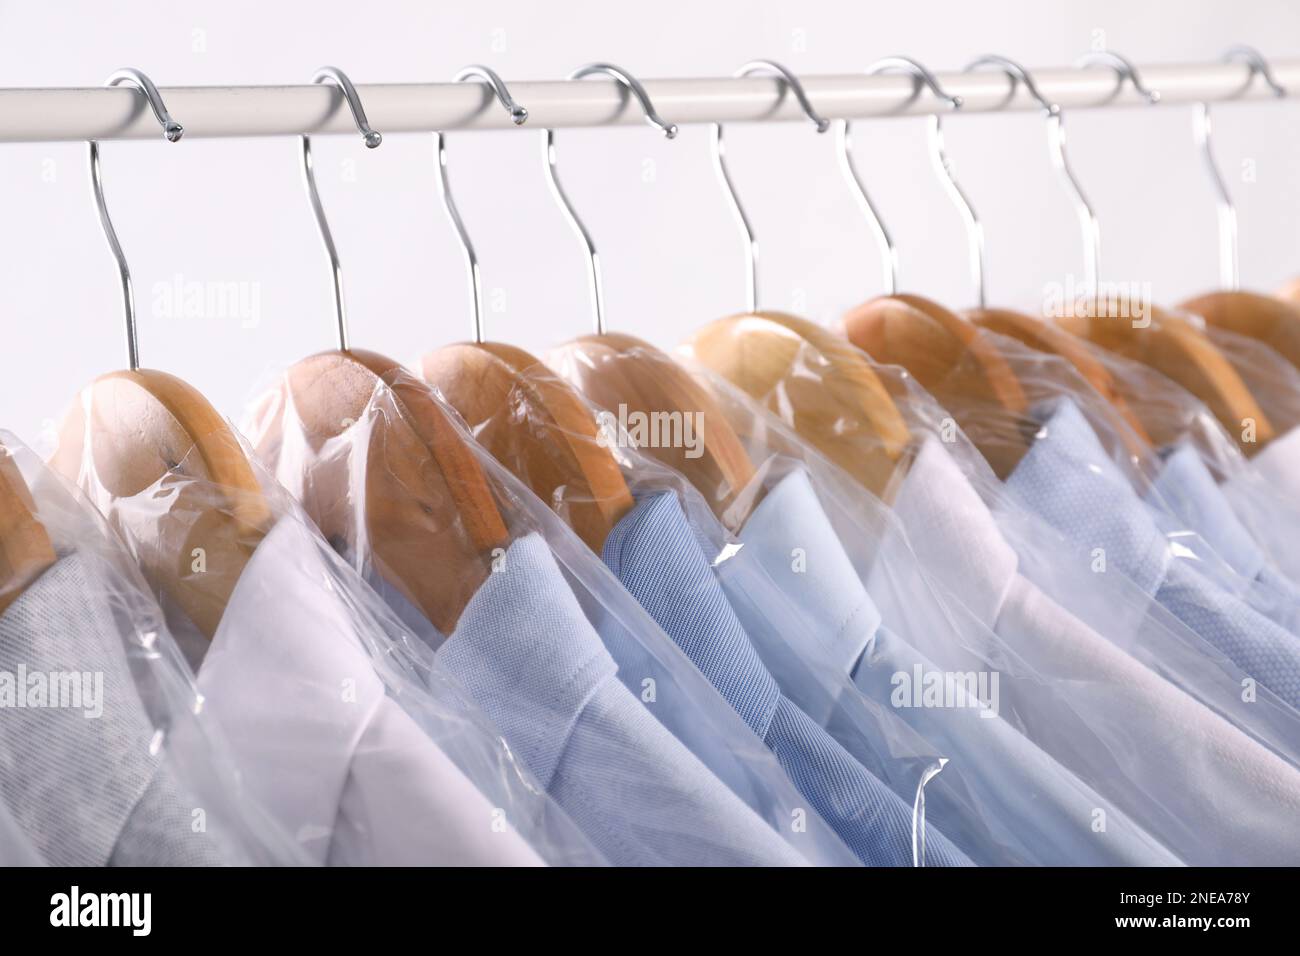 https://c8.alamy.com/comp/2NEA78Y/hangers-with-shirts-in-dry-cleaning-plastic-bags-on-rack-against-light-background-closeup-2NEA78Y.jpg